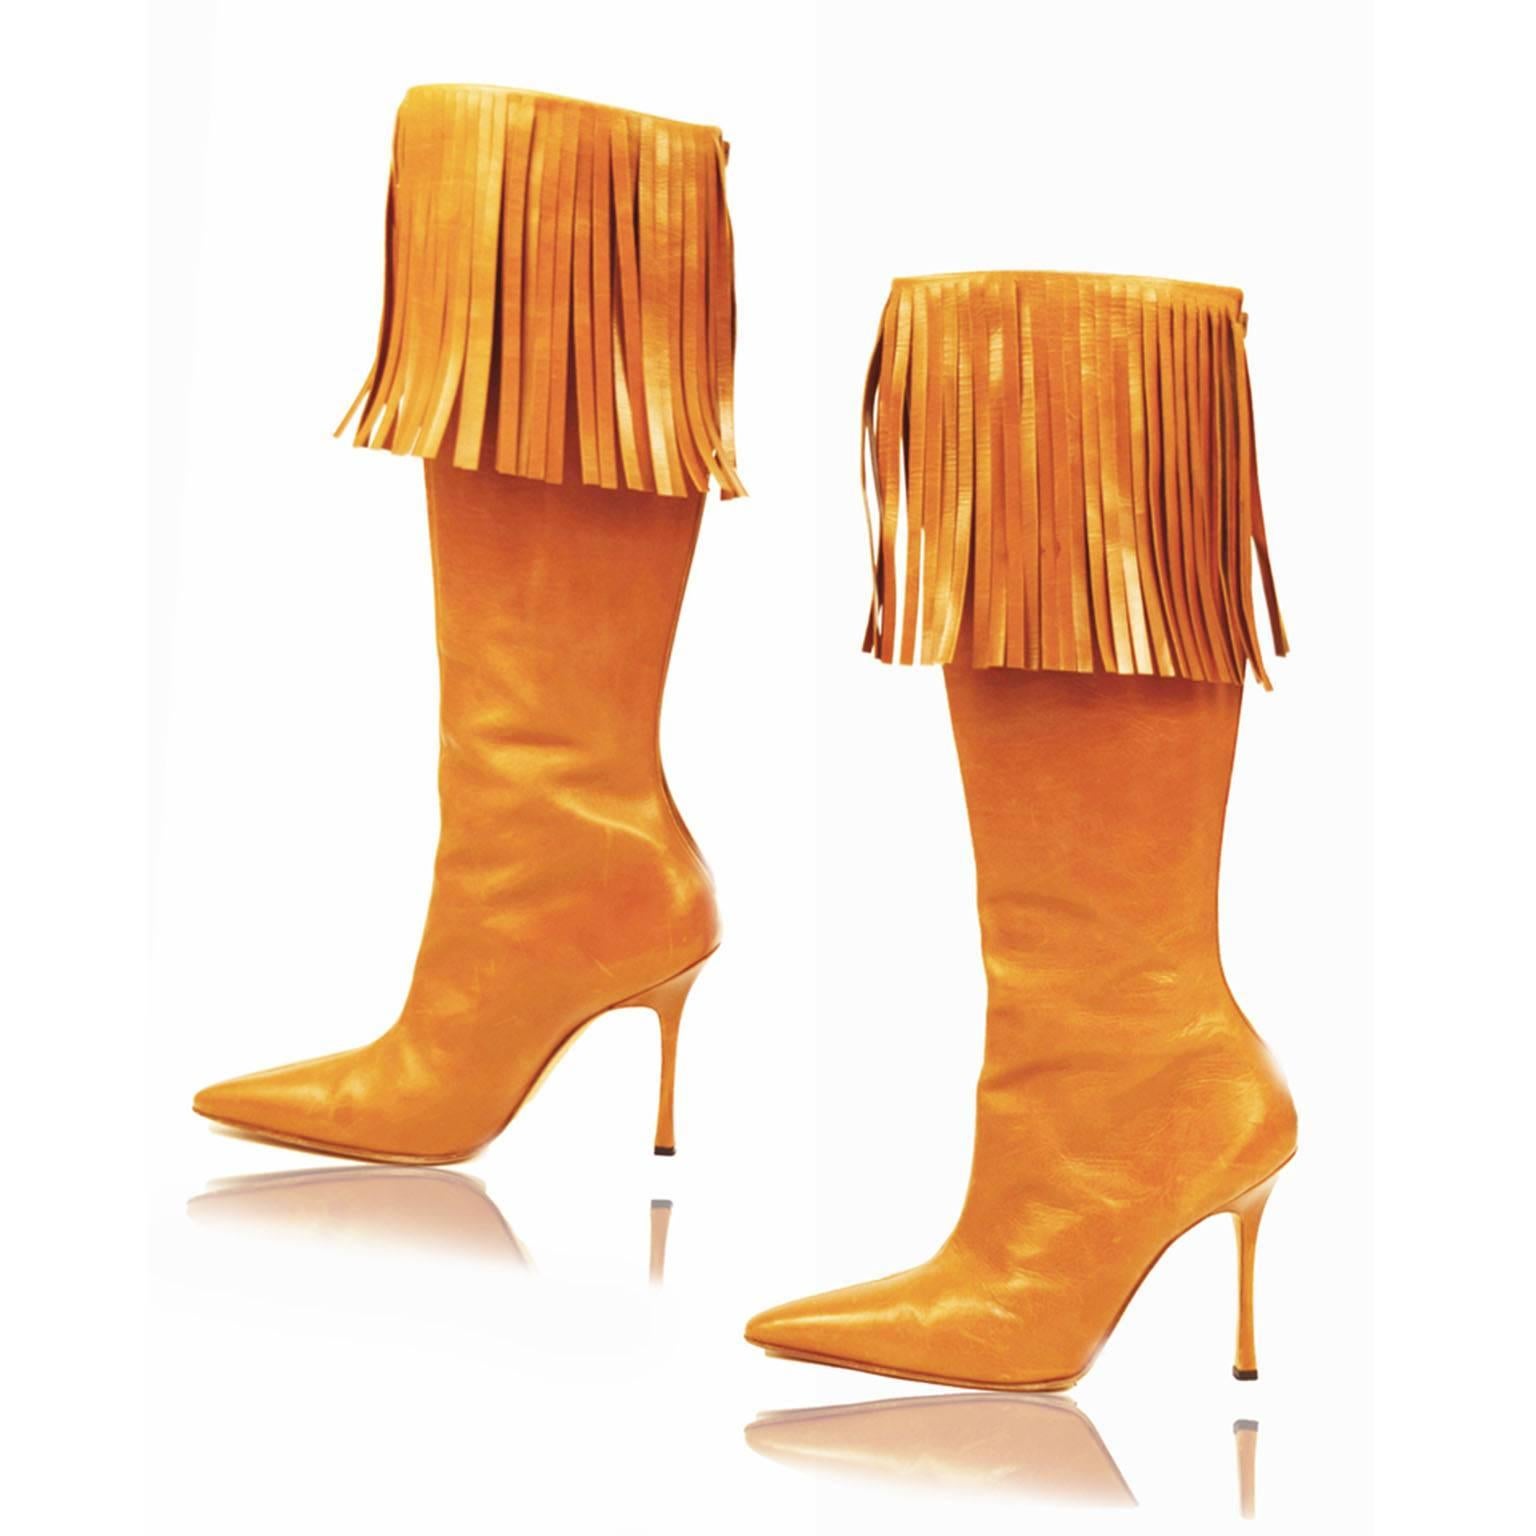 Manolo Blahnik Cognac Leather Fringe Knee High Boots In Good Condition For Sale In Henrico, VA